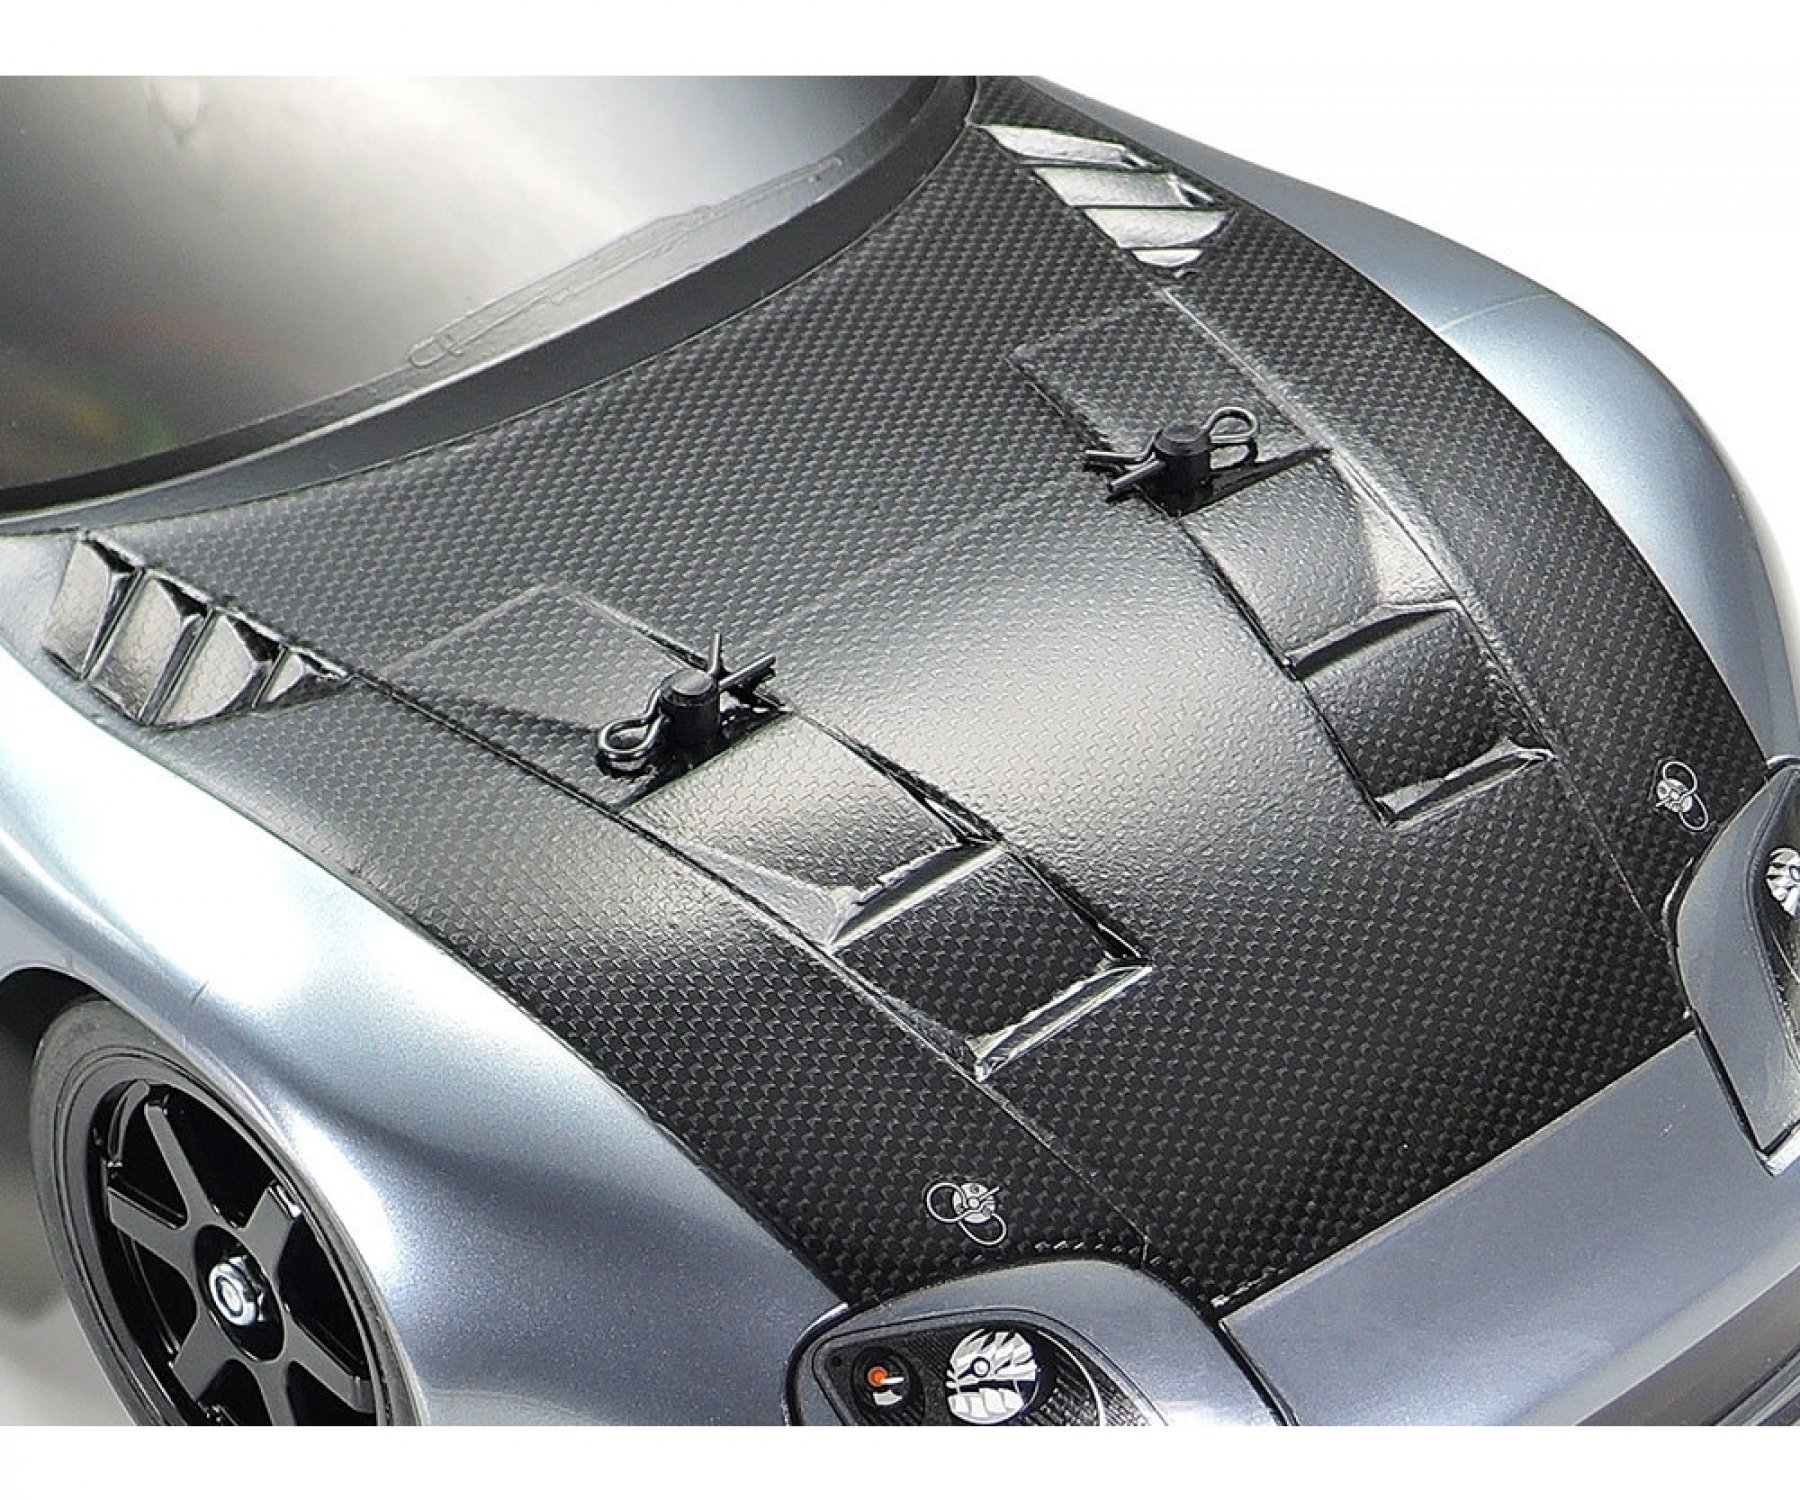 Take a look at the muscular engine hood of the car. Carbon fibre pattern stickers add to the racy mood.